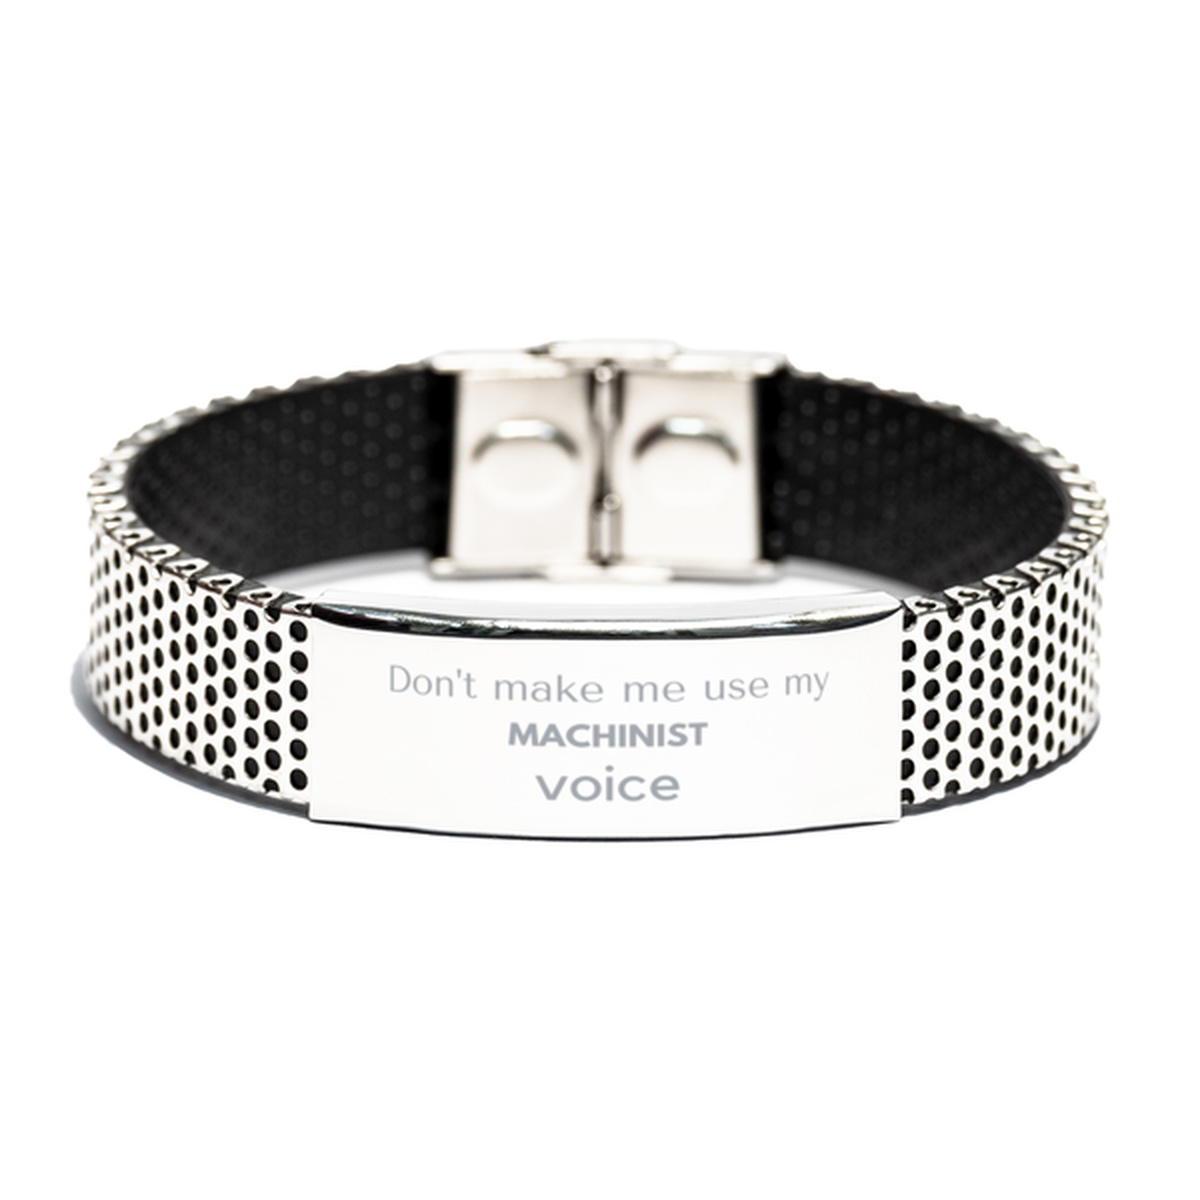 Don't make me use my Machinist voice, Sarcasm Machinist Gifts, Christmas Machinist Stainless Steel Bracelet Birthday Unique Gifts For Machinist Coworkers, Men, Women, Colleague, Friends